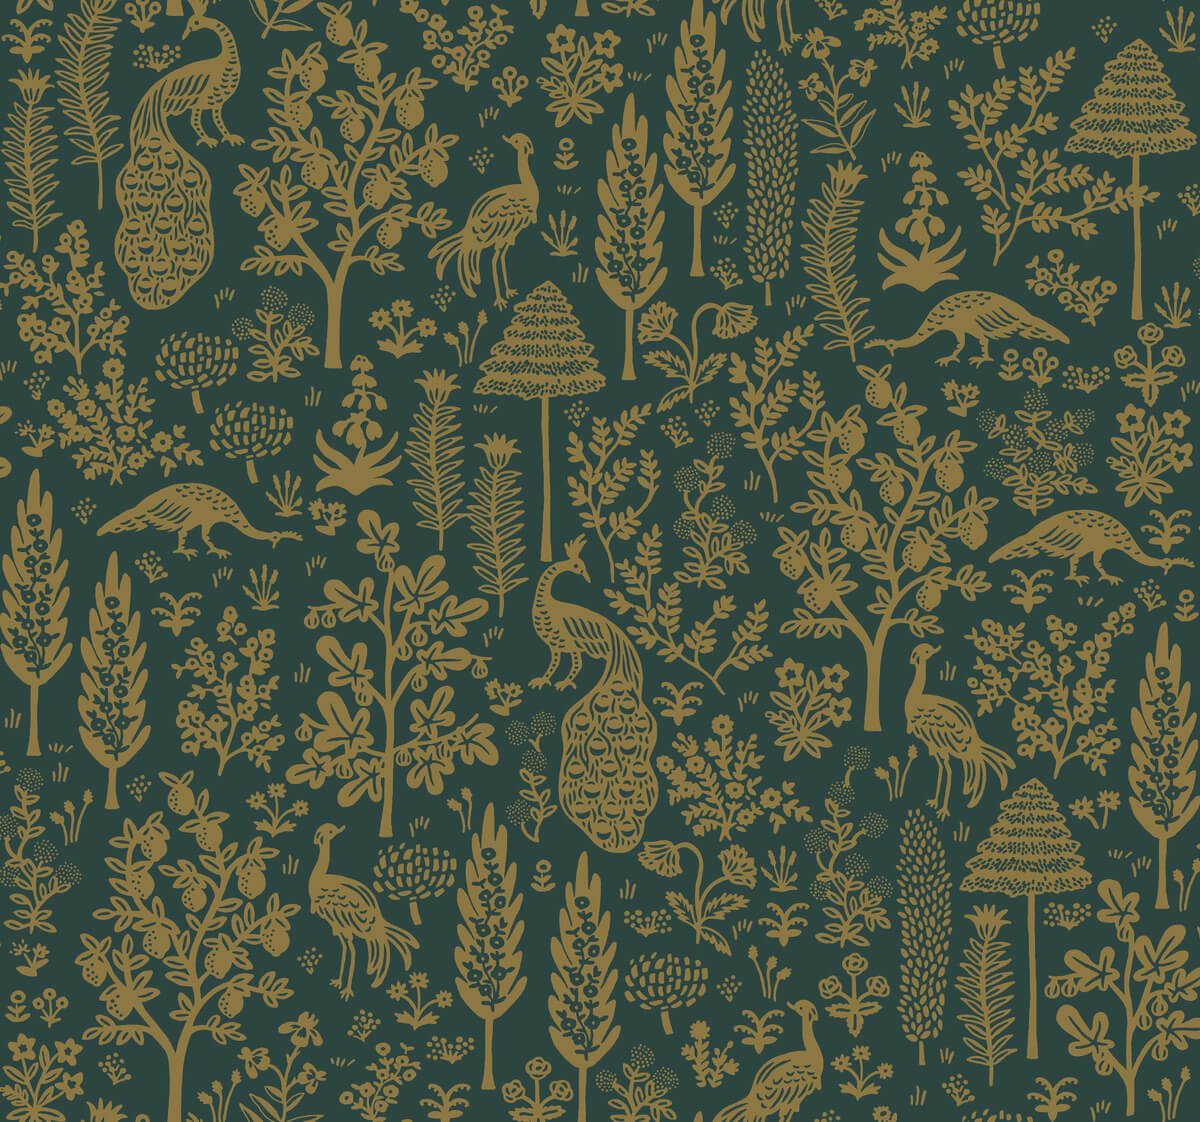 Rifle Paper Co. Second Edition Menagerie Toile Wallpaper - SAMPLE